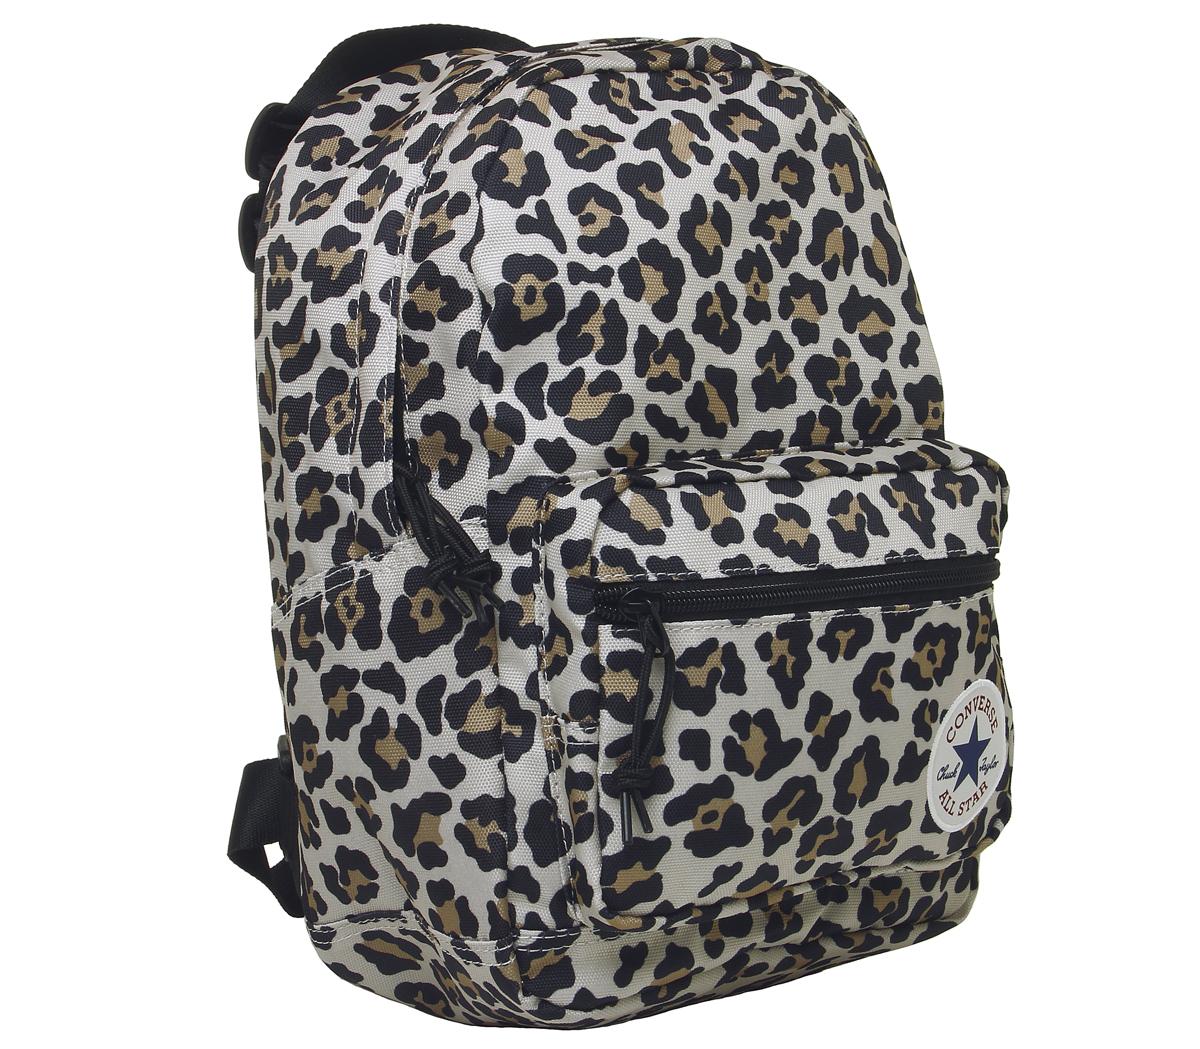 converse leopard backpack